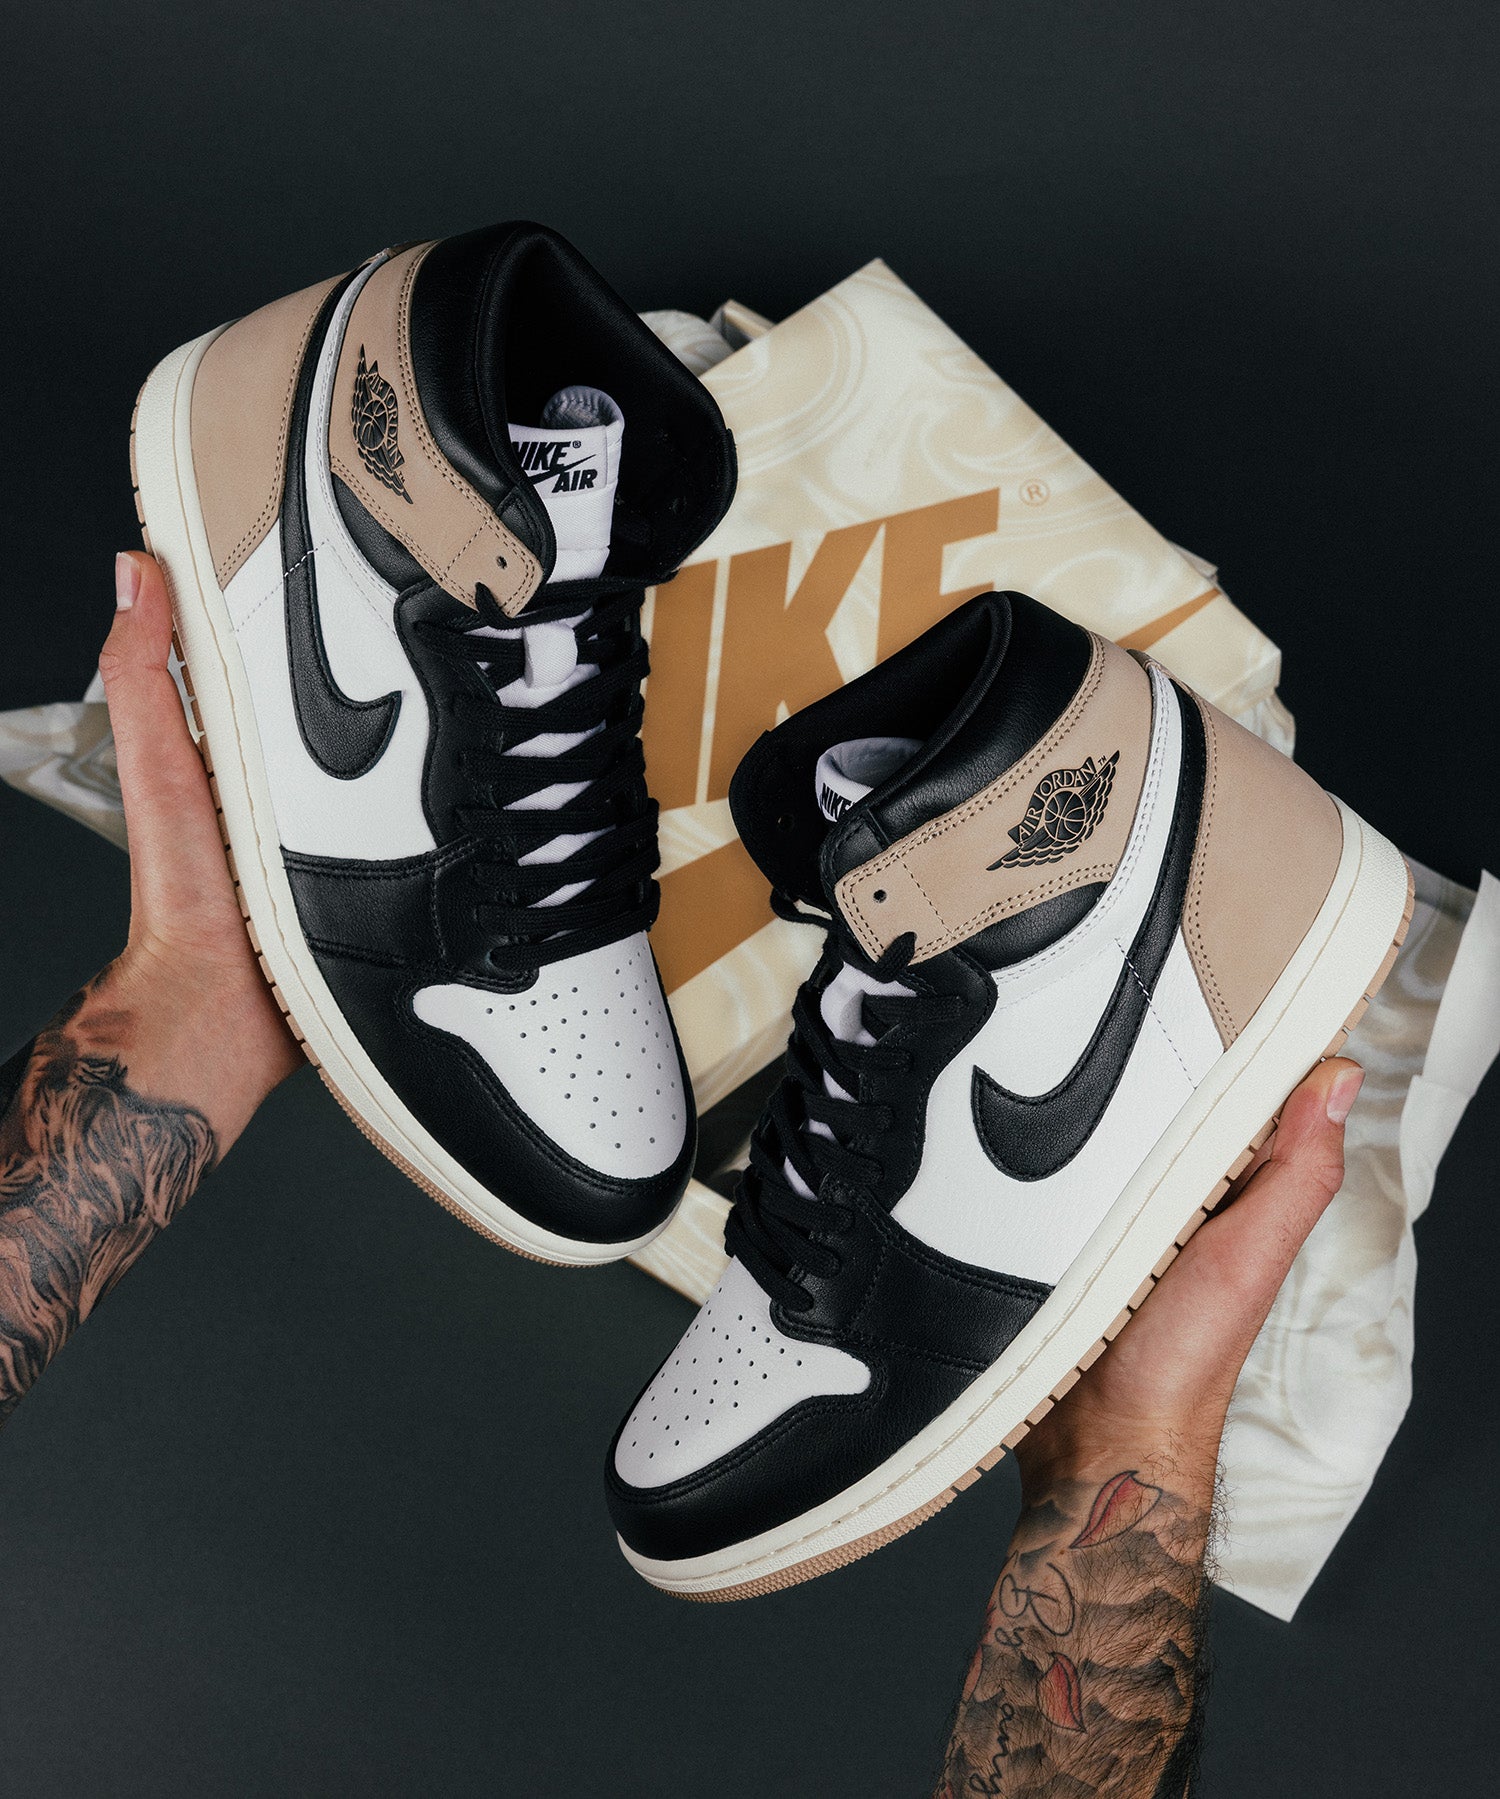 Discover the Exclusive Jordan 1 Retro High OG 'Latte' at Common Hype